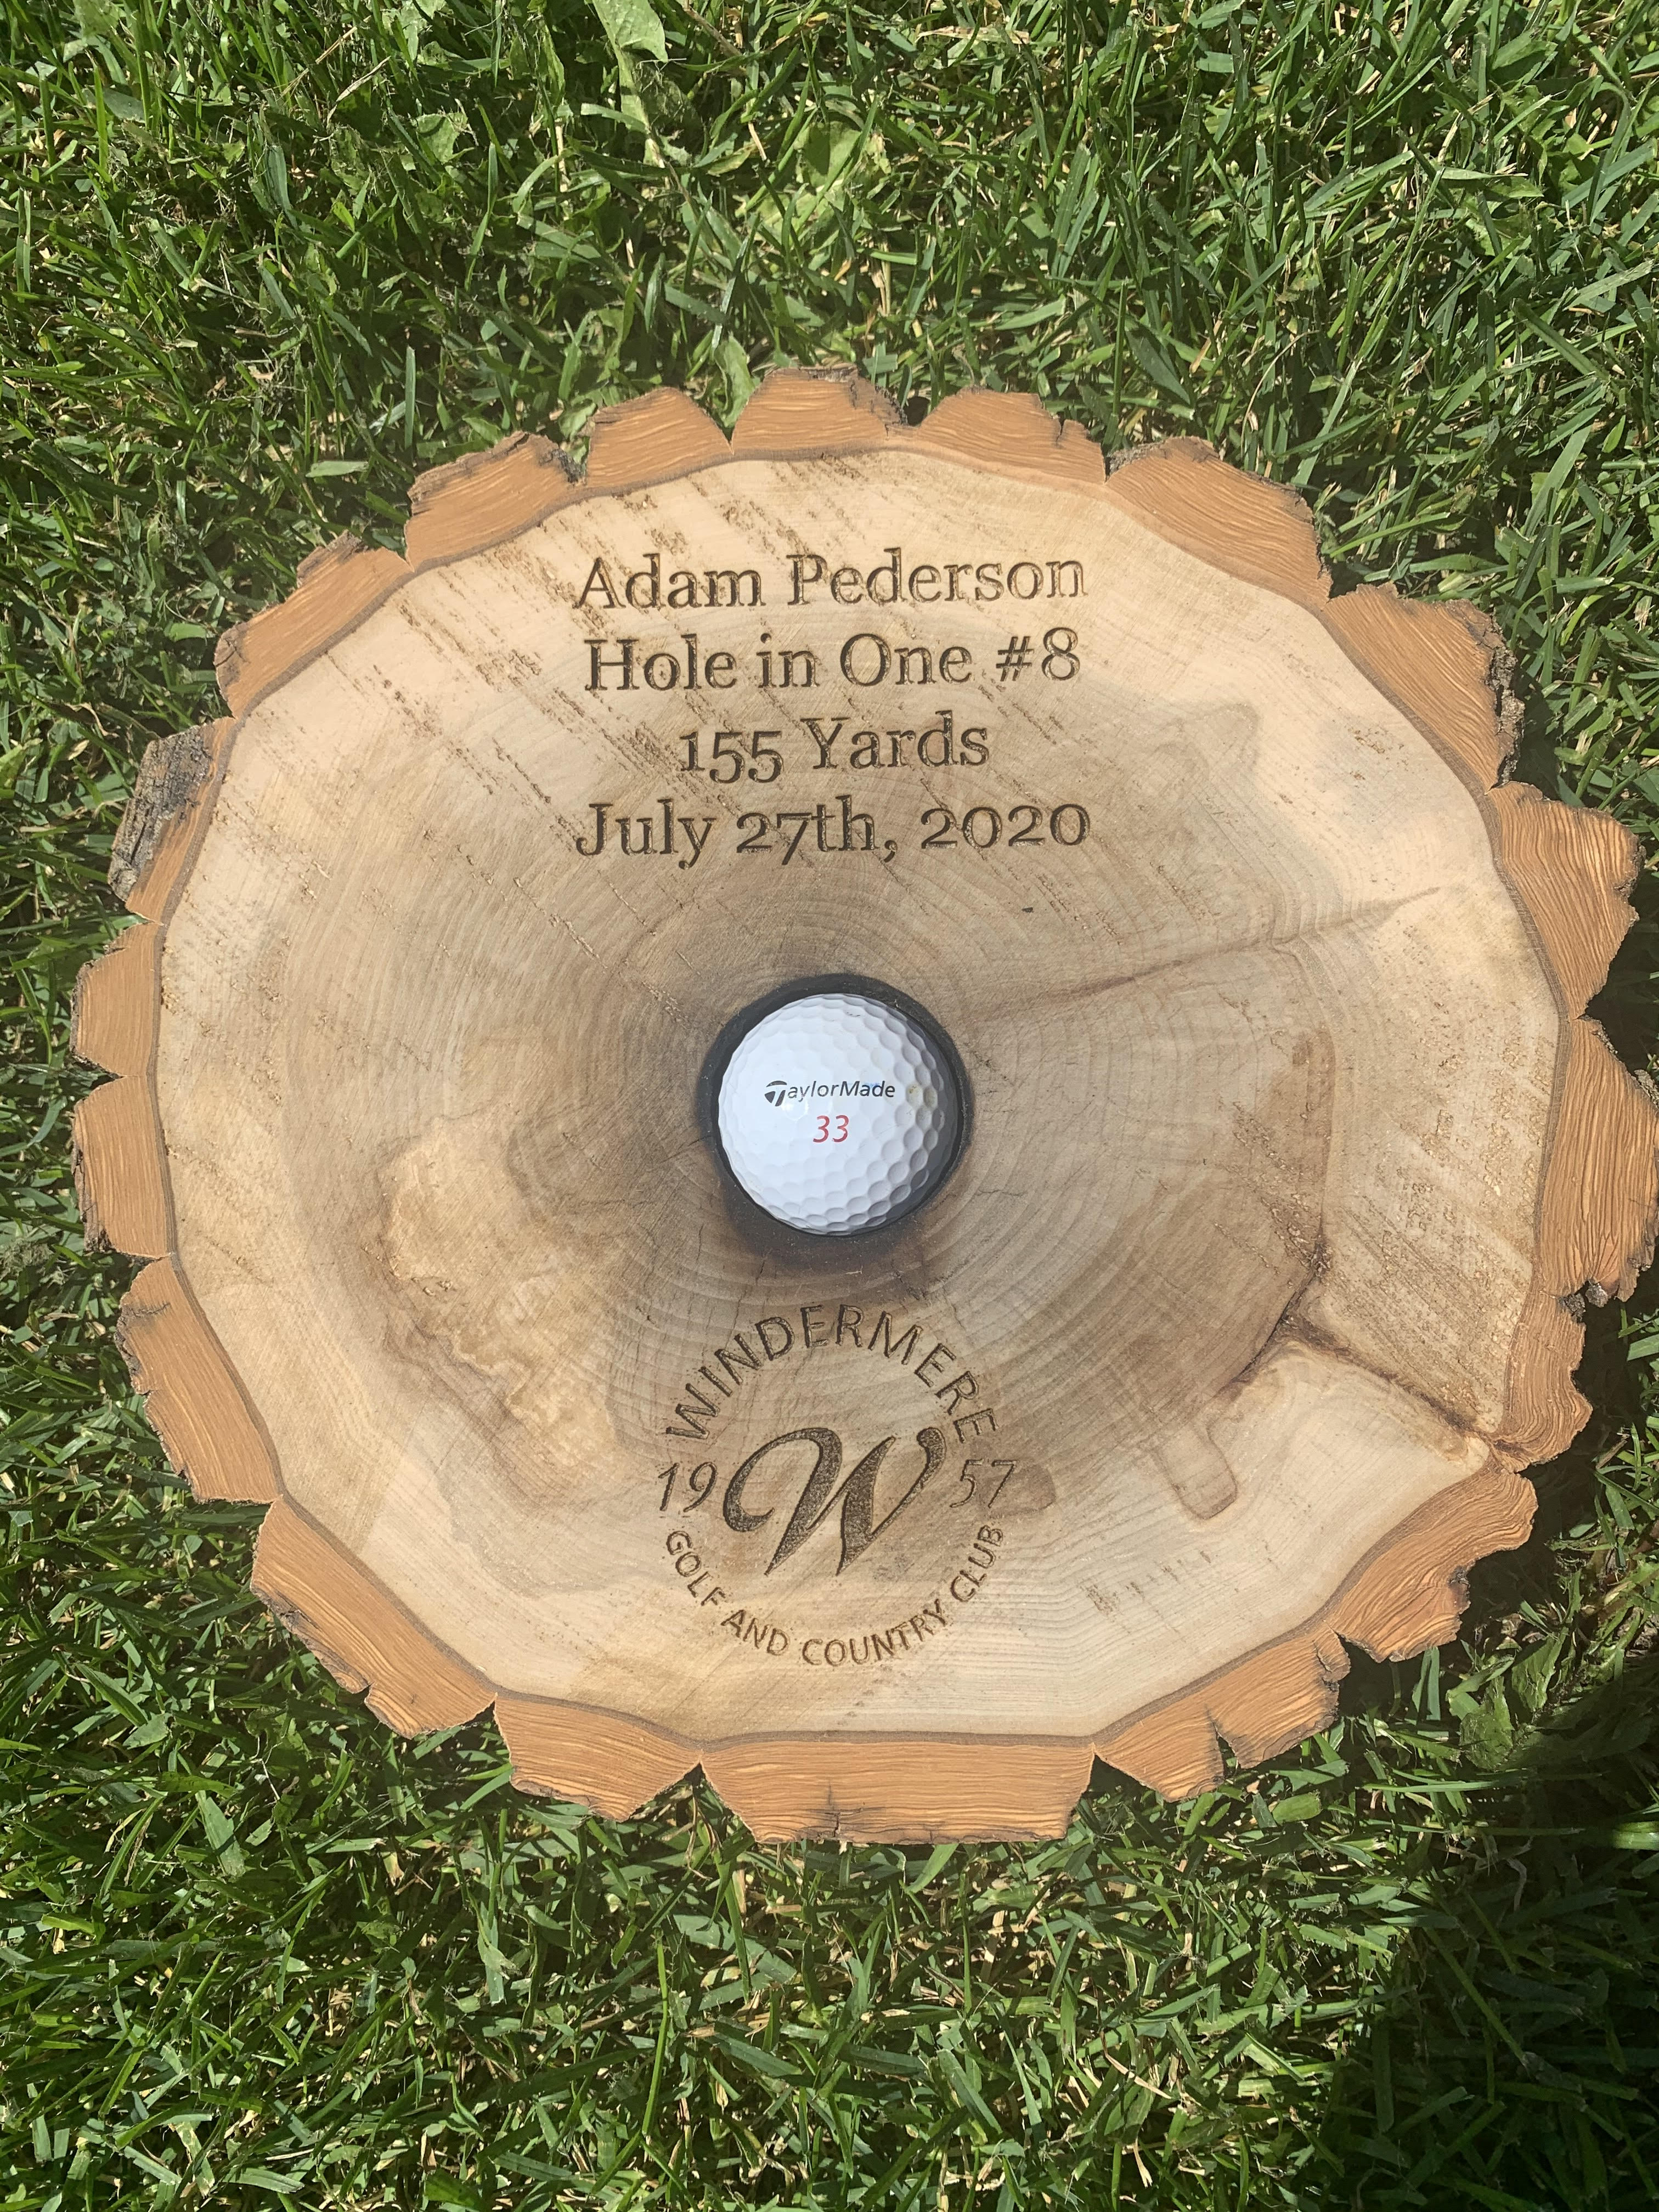 Hole in One Log with lasered hole for Ball - Blackwolf Golf